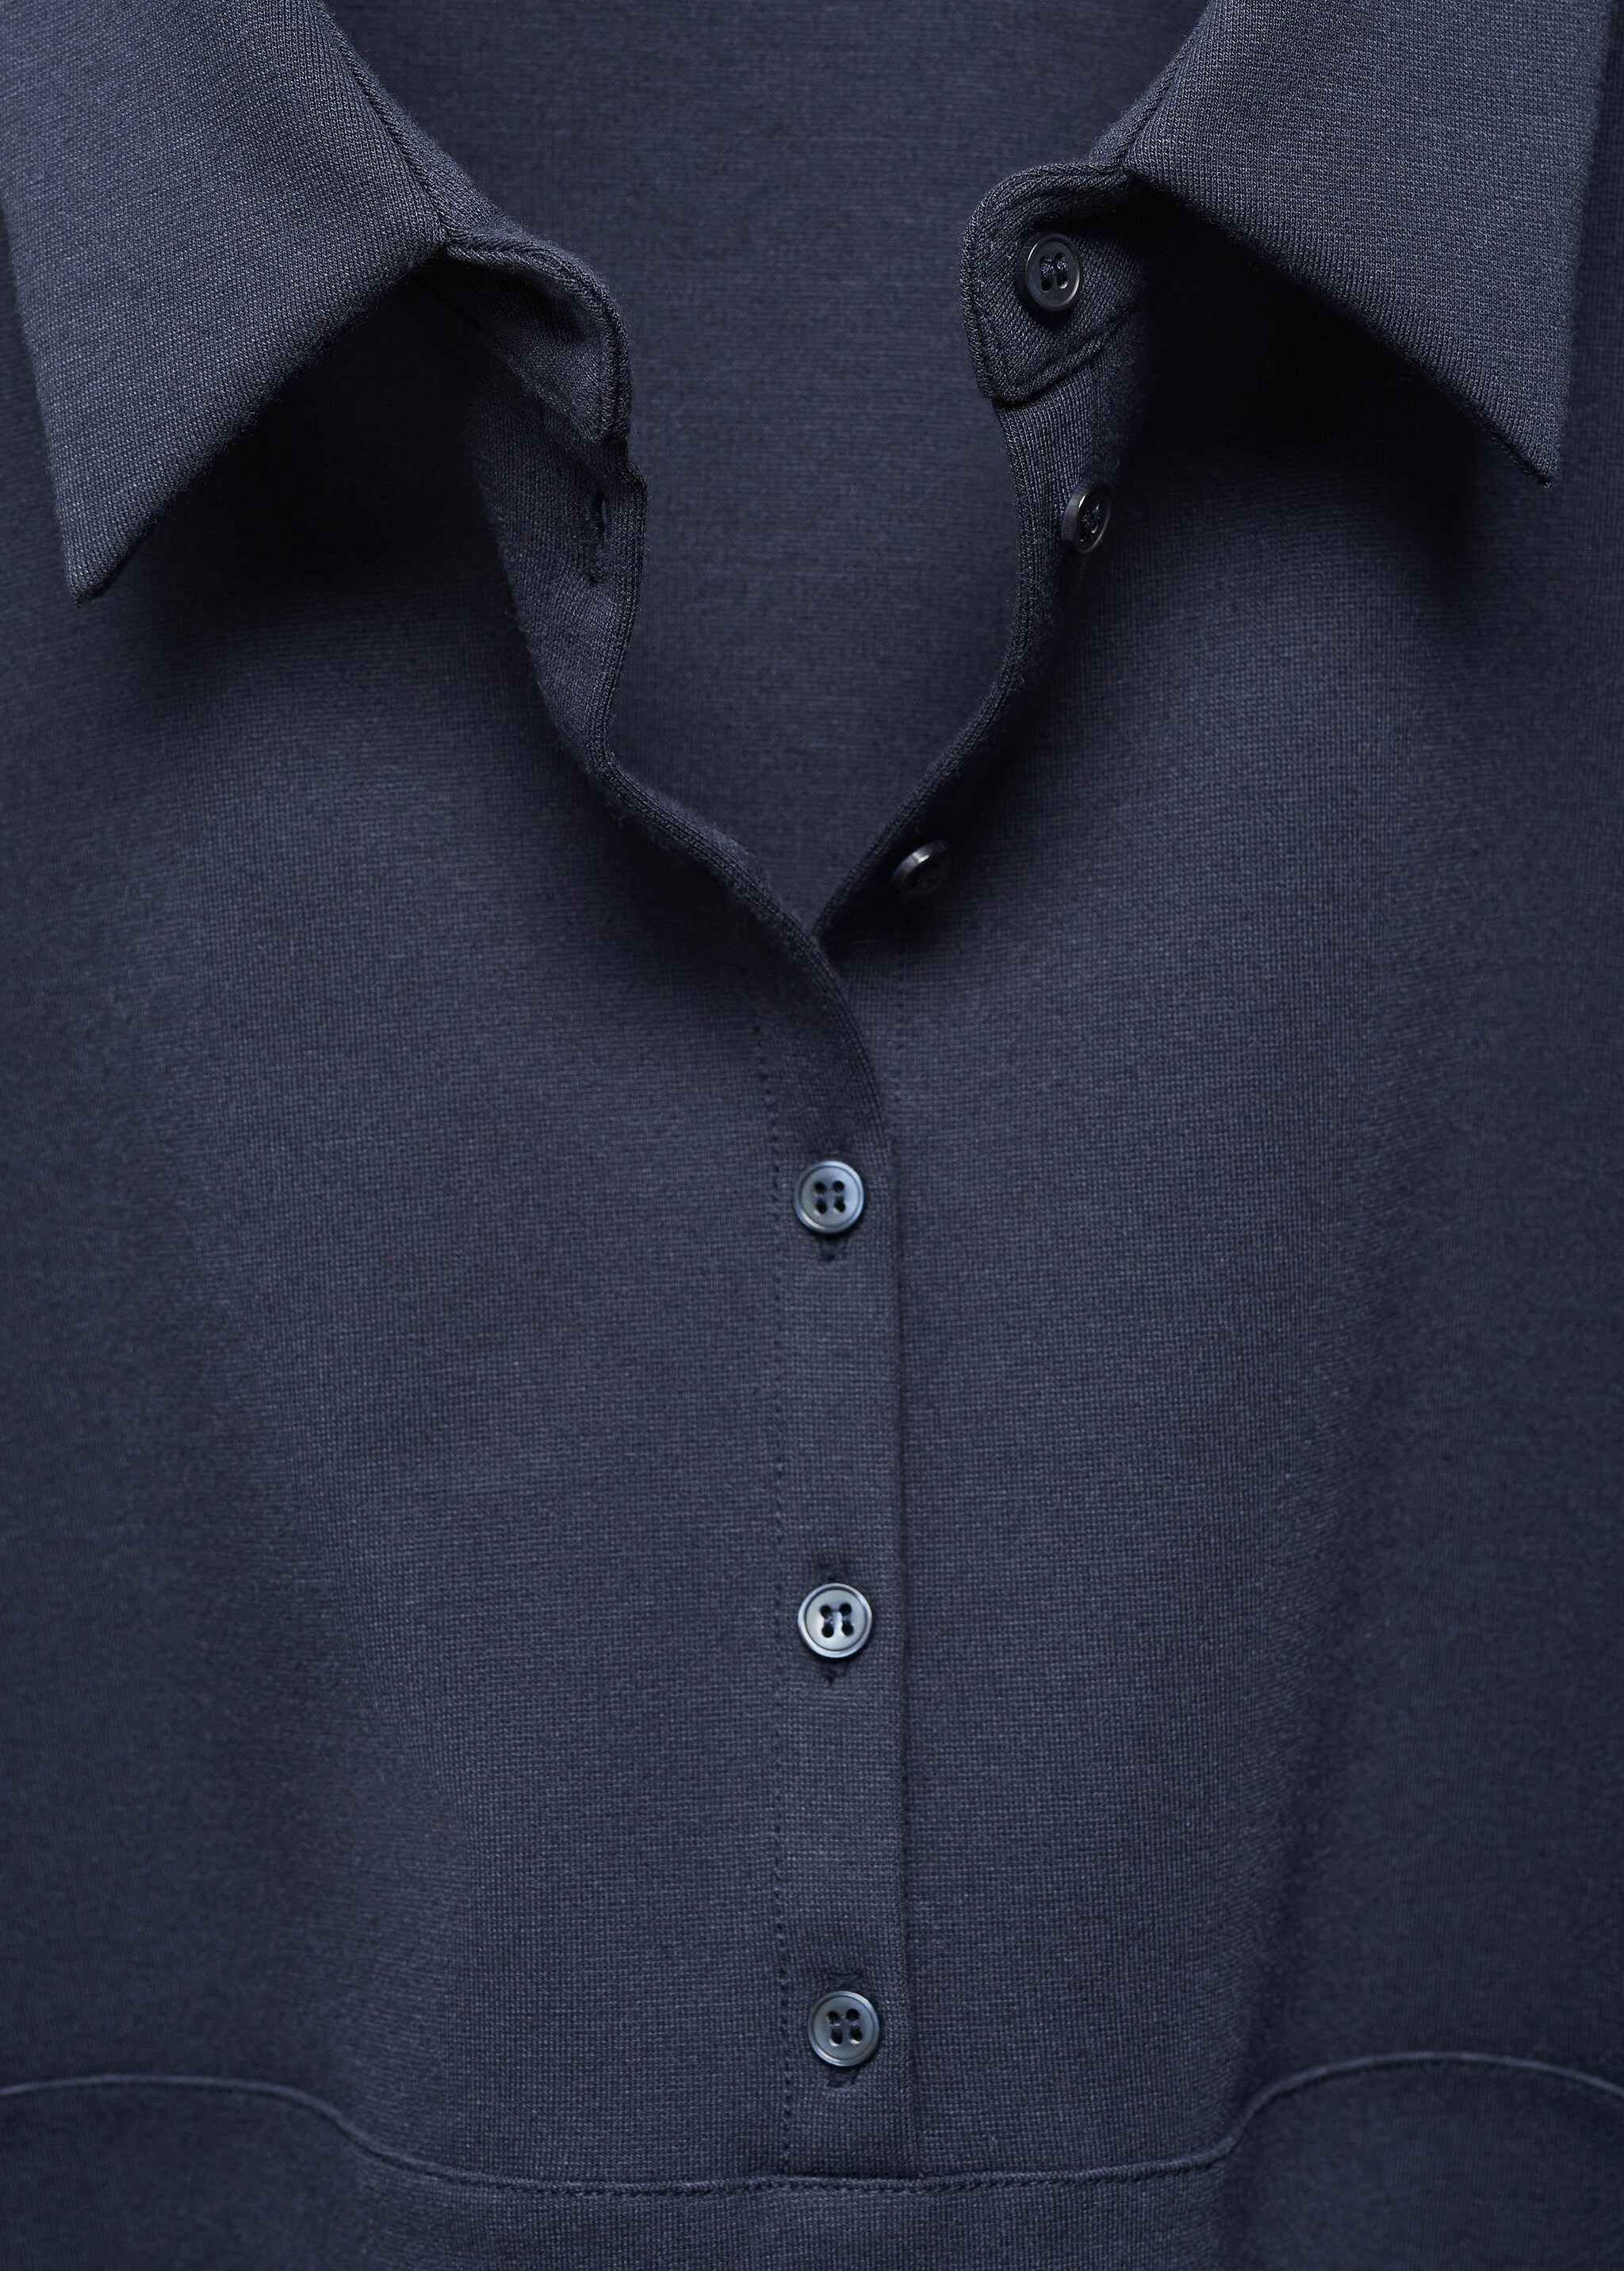 Adjustable drawstring polo sweatshirt - Details of the article 8